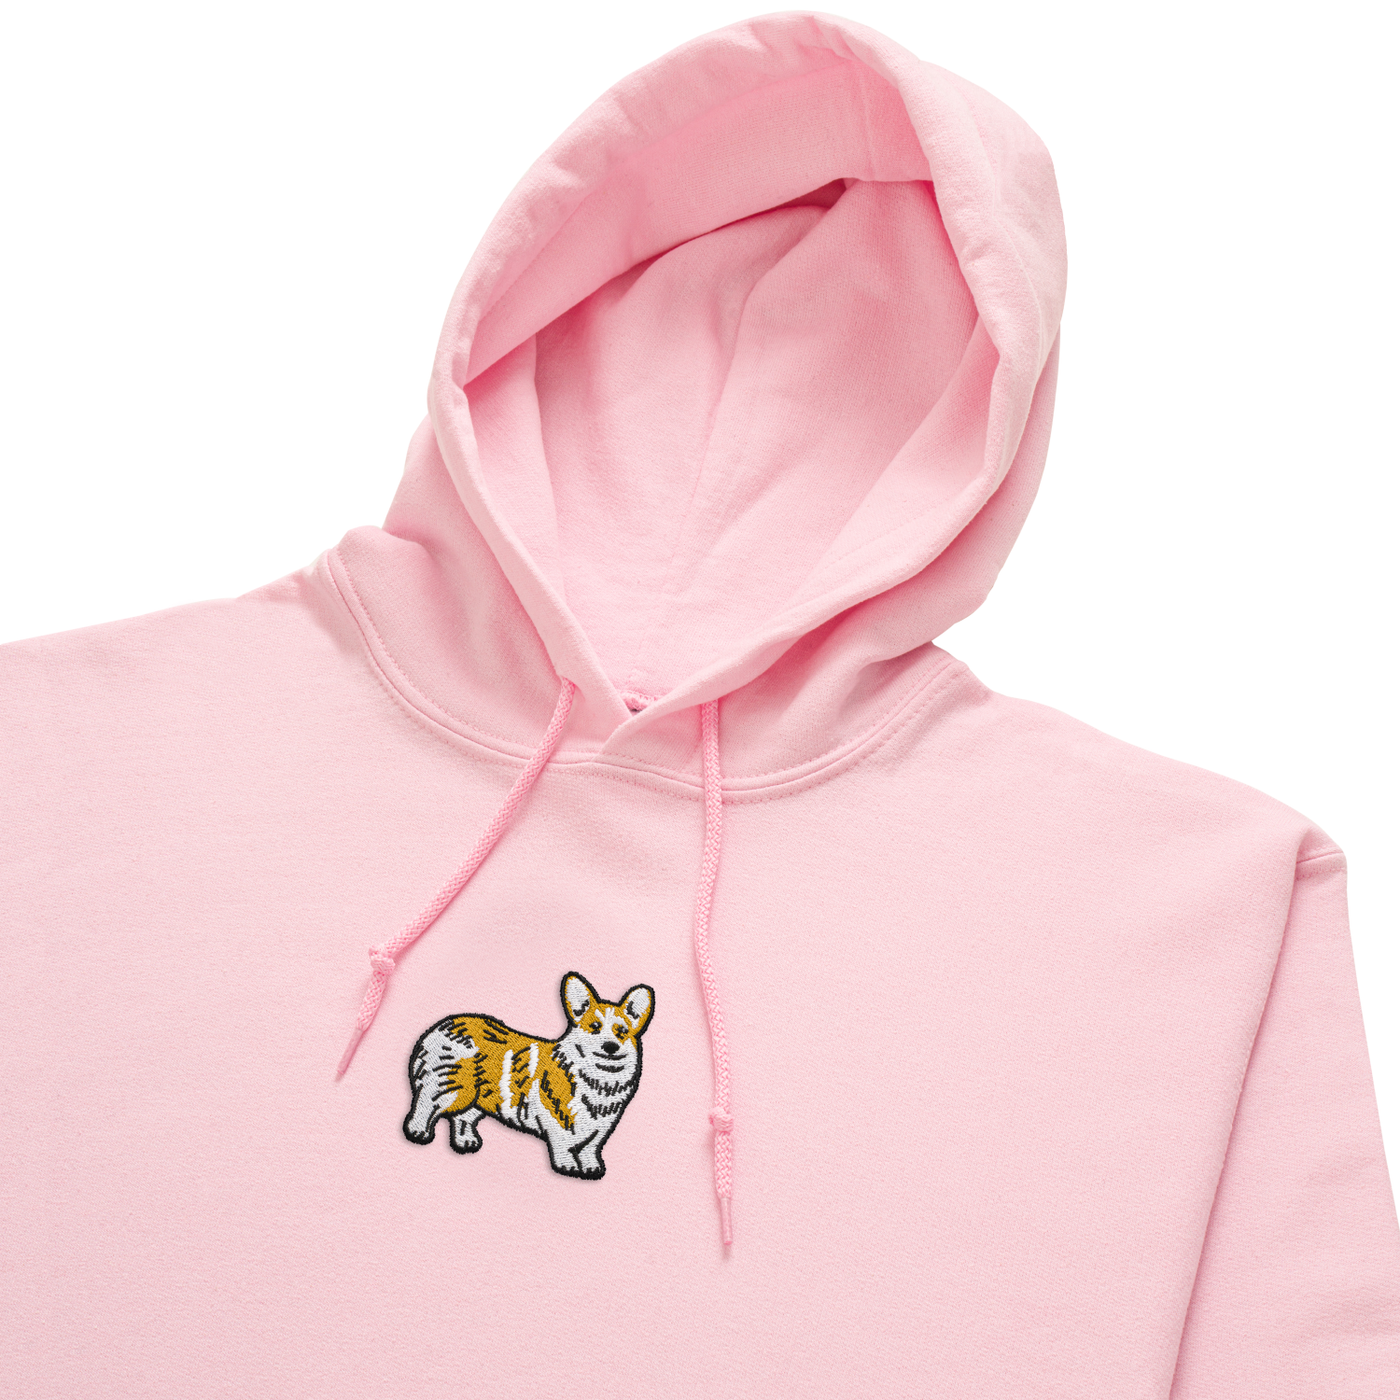 Bobby's Planet Women's Embroidered Corgi Hoodie from Paws Dog Cat Animals Collection in Light Pink Color#color_light-pink